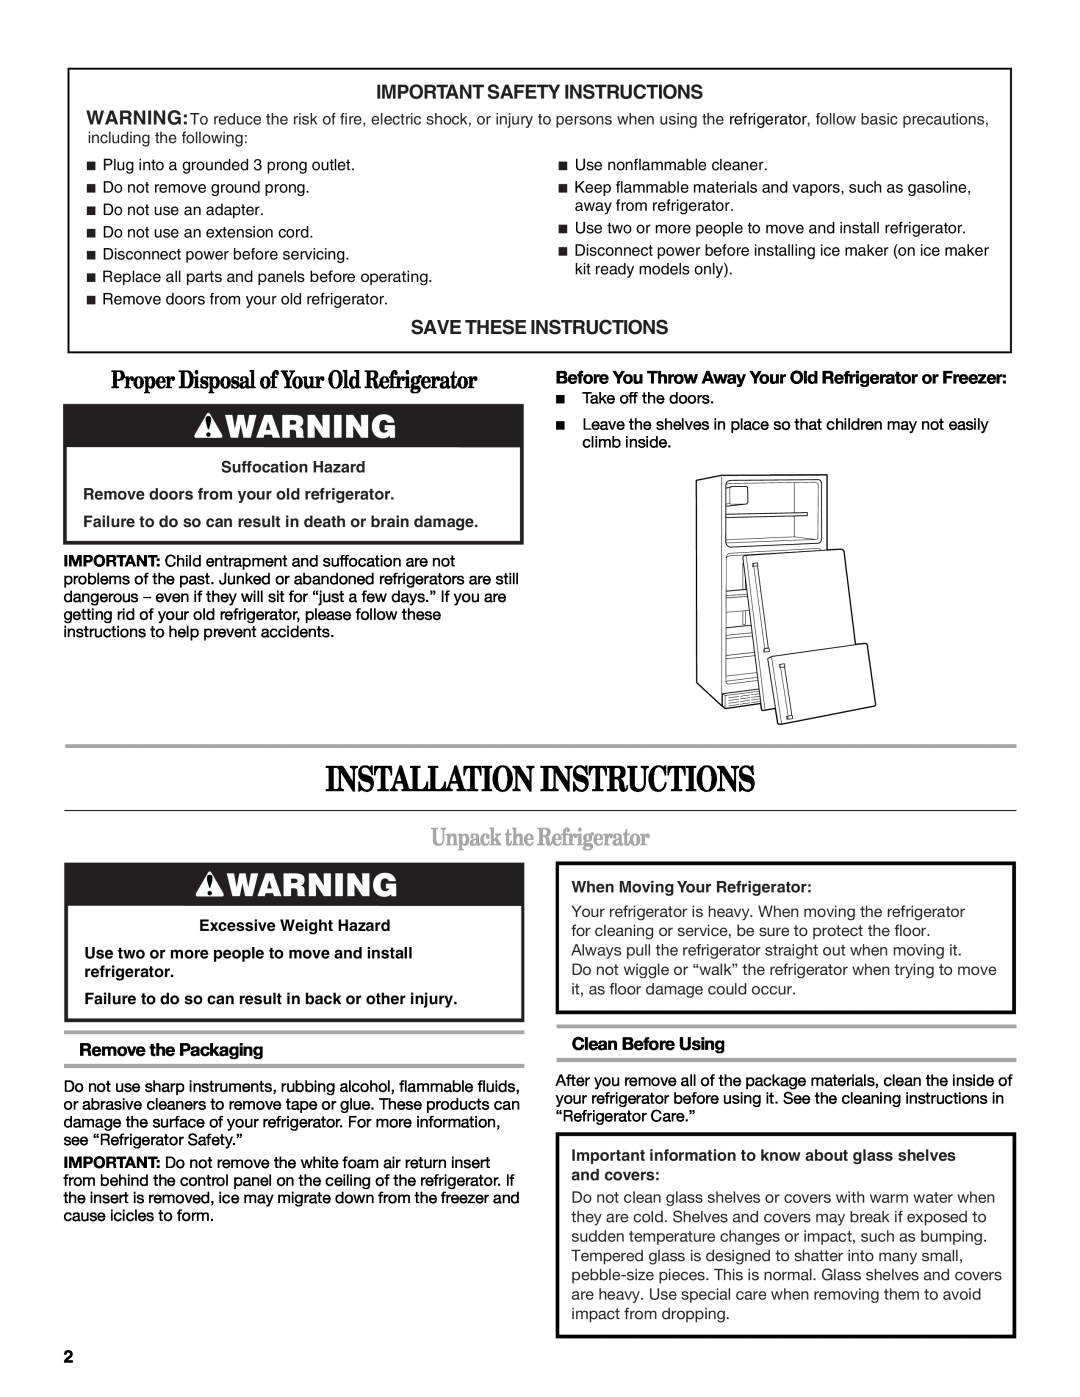 Whirlpool GR2FHMXV Installation Instructions, Unpack the Refrigerator, Important Safety Instructions, Remove the Packaging 